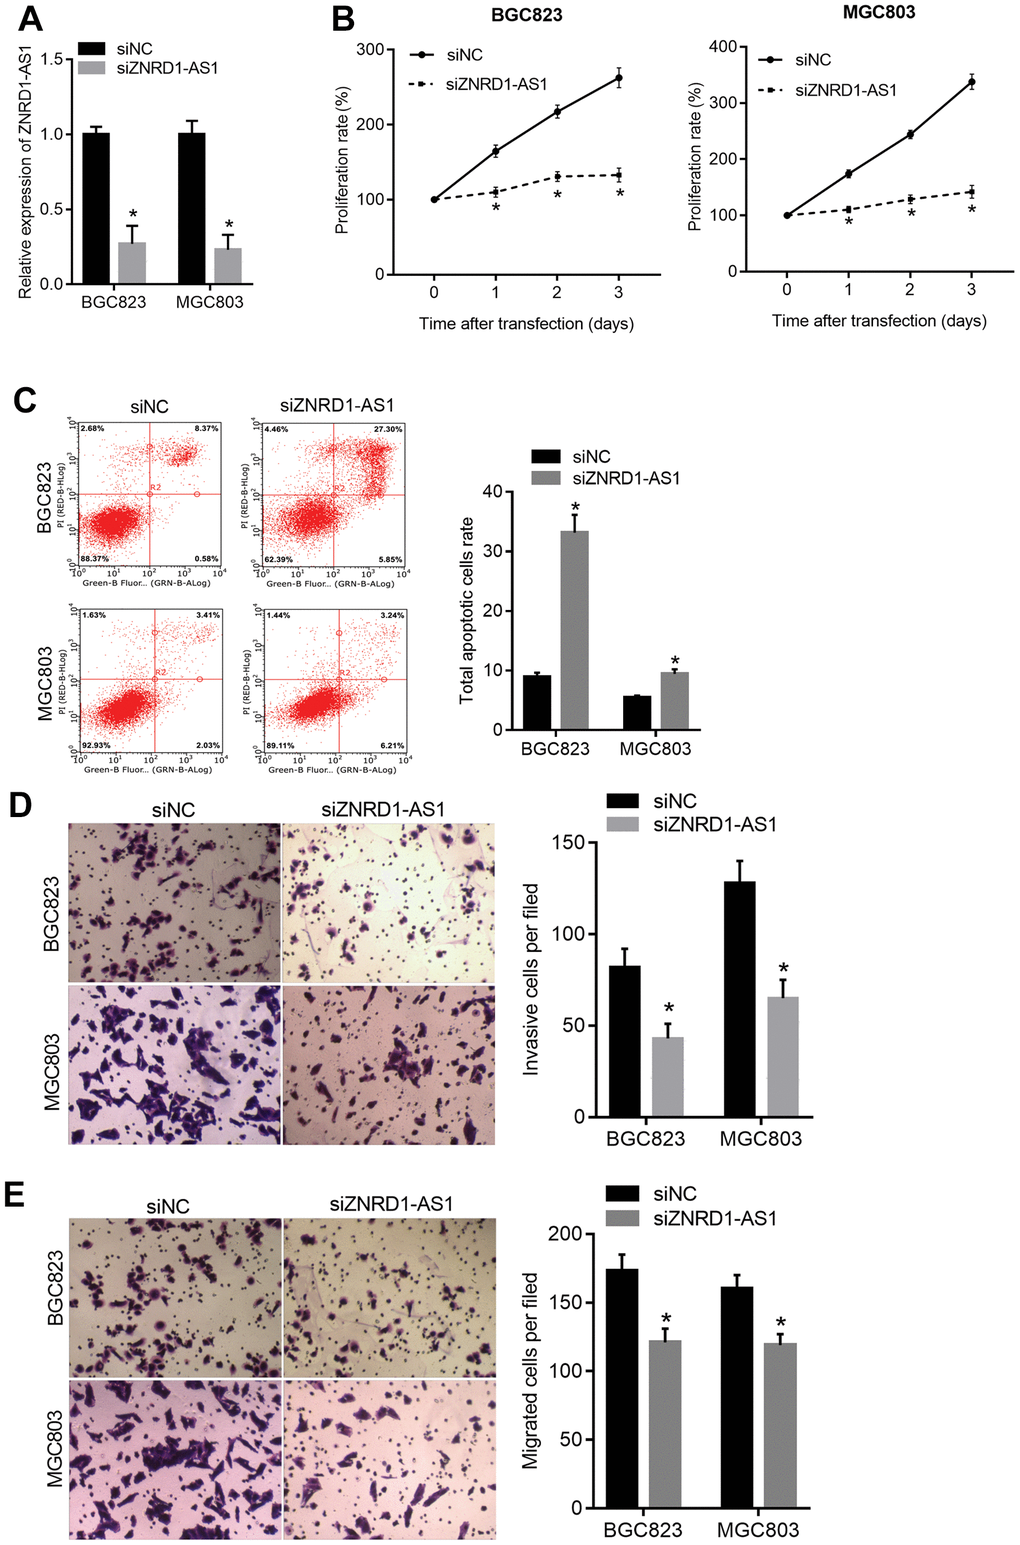 ZNRD1-AS1 knockdown suppresses malignant characteristics and promotes apoptosis in MGC803 and BGC823 cells. siRNA targeting ZNRD1-AS1 (siZNRD1-AS1) or negative control siRNA (siNC) was transfected into MGC803 and BGC823 cells. ZNRD1-AS1 levels were measured using qRT-PCR (A). Cell proliferation (B) and apoptosis (C) were analyzed by CCK8 assay and flow cytometry, respectively. Cell invasion (D) and migration (E) were analyzed by Transwell assays. Left panels show representative micrographs. Right panels show statistical results. *p 